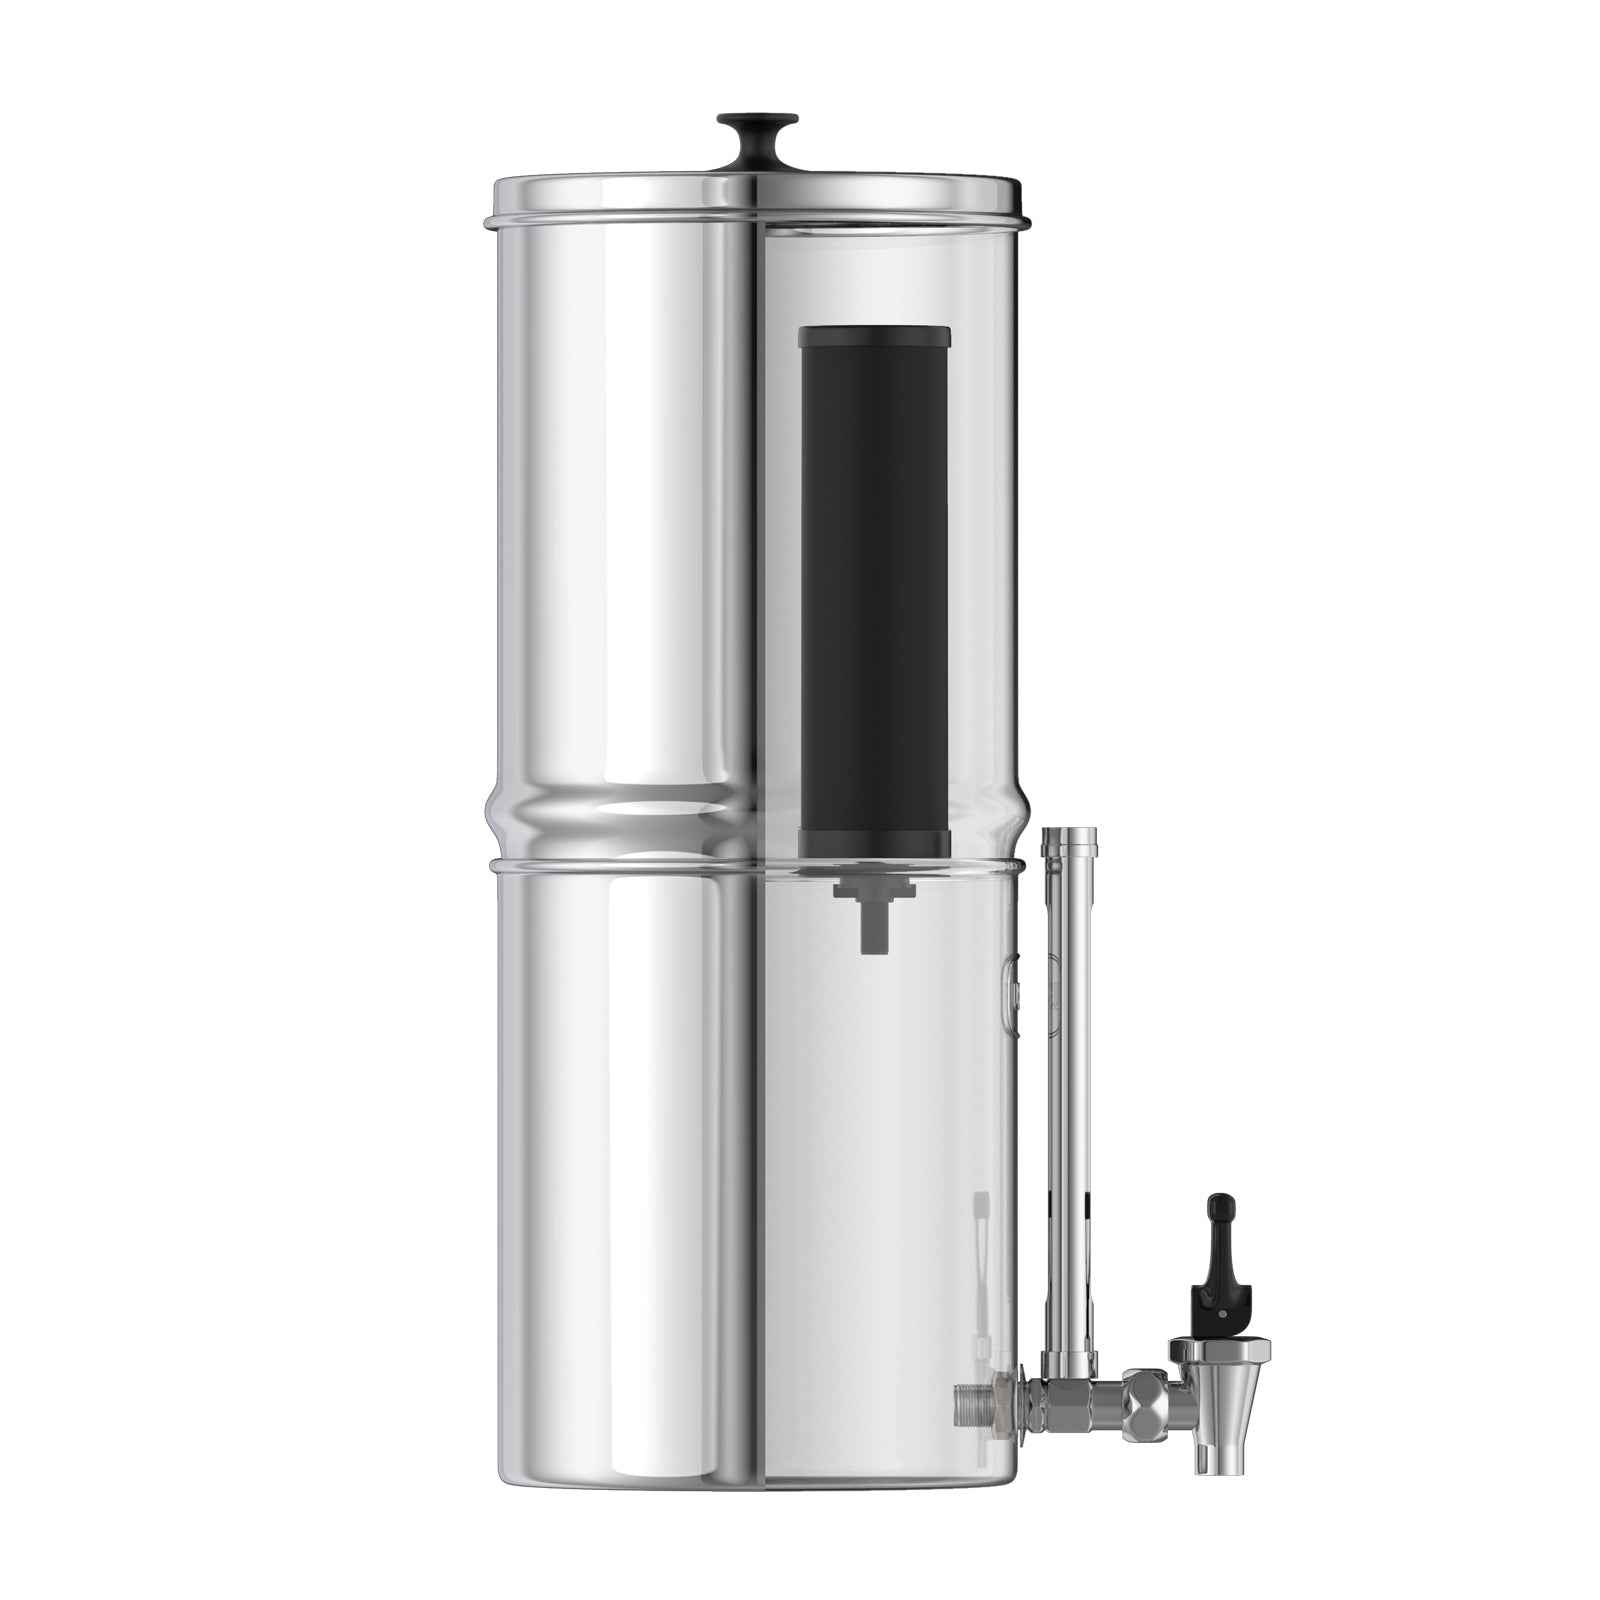 USWF 2.25 Gallon Stainless Steel Gravity Fed Filter System